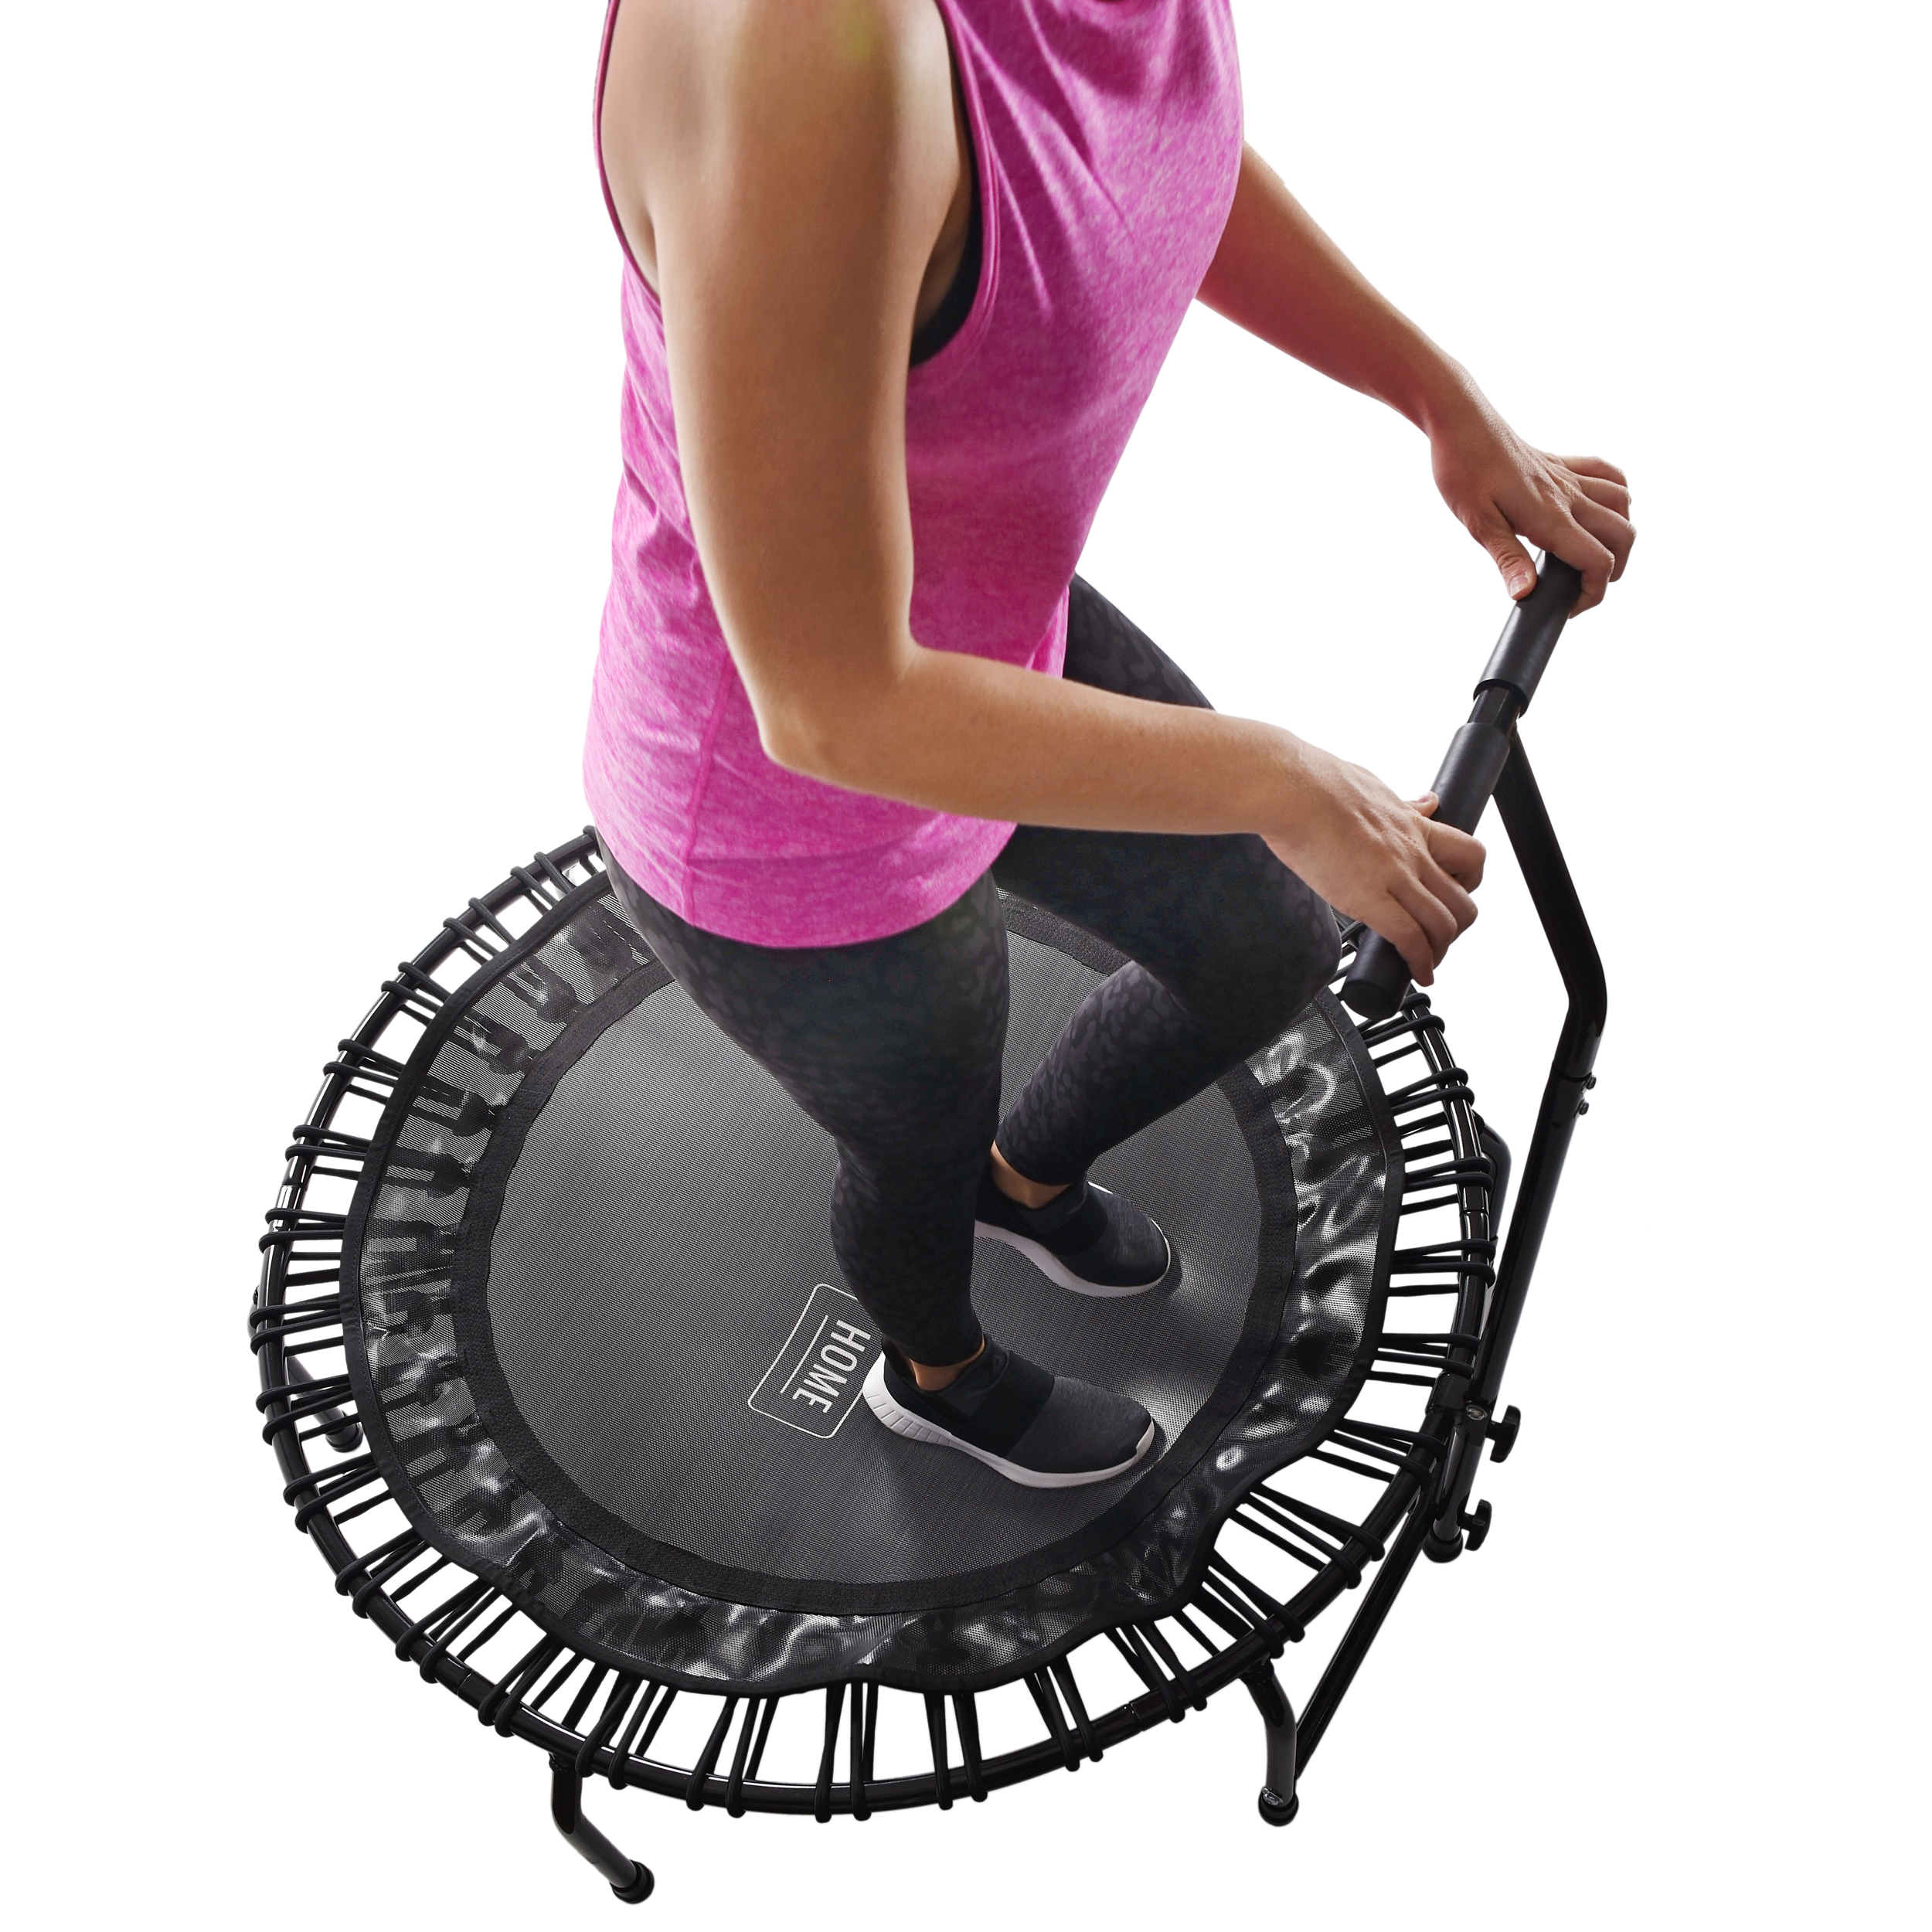 JumpSport Home 120 Fitness Trampoline Stamina Products | lupon.gov.ph